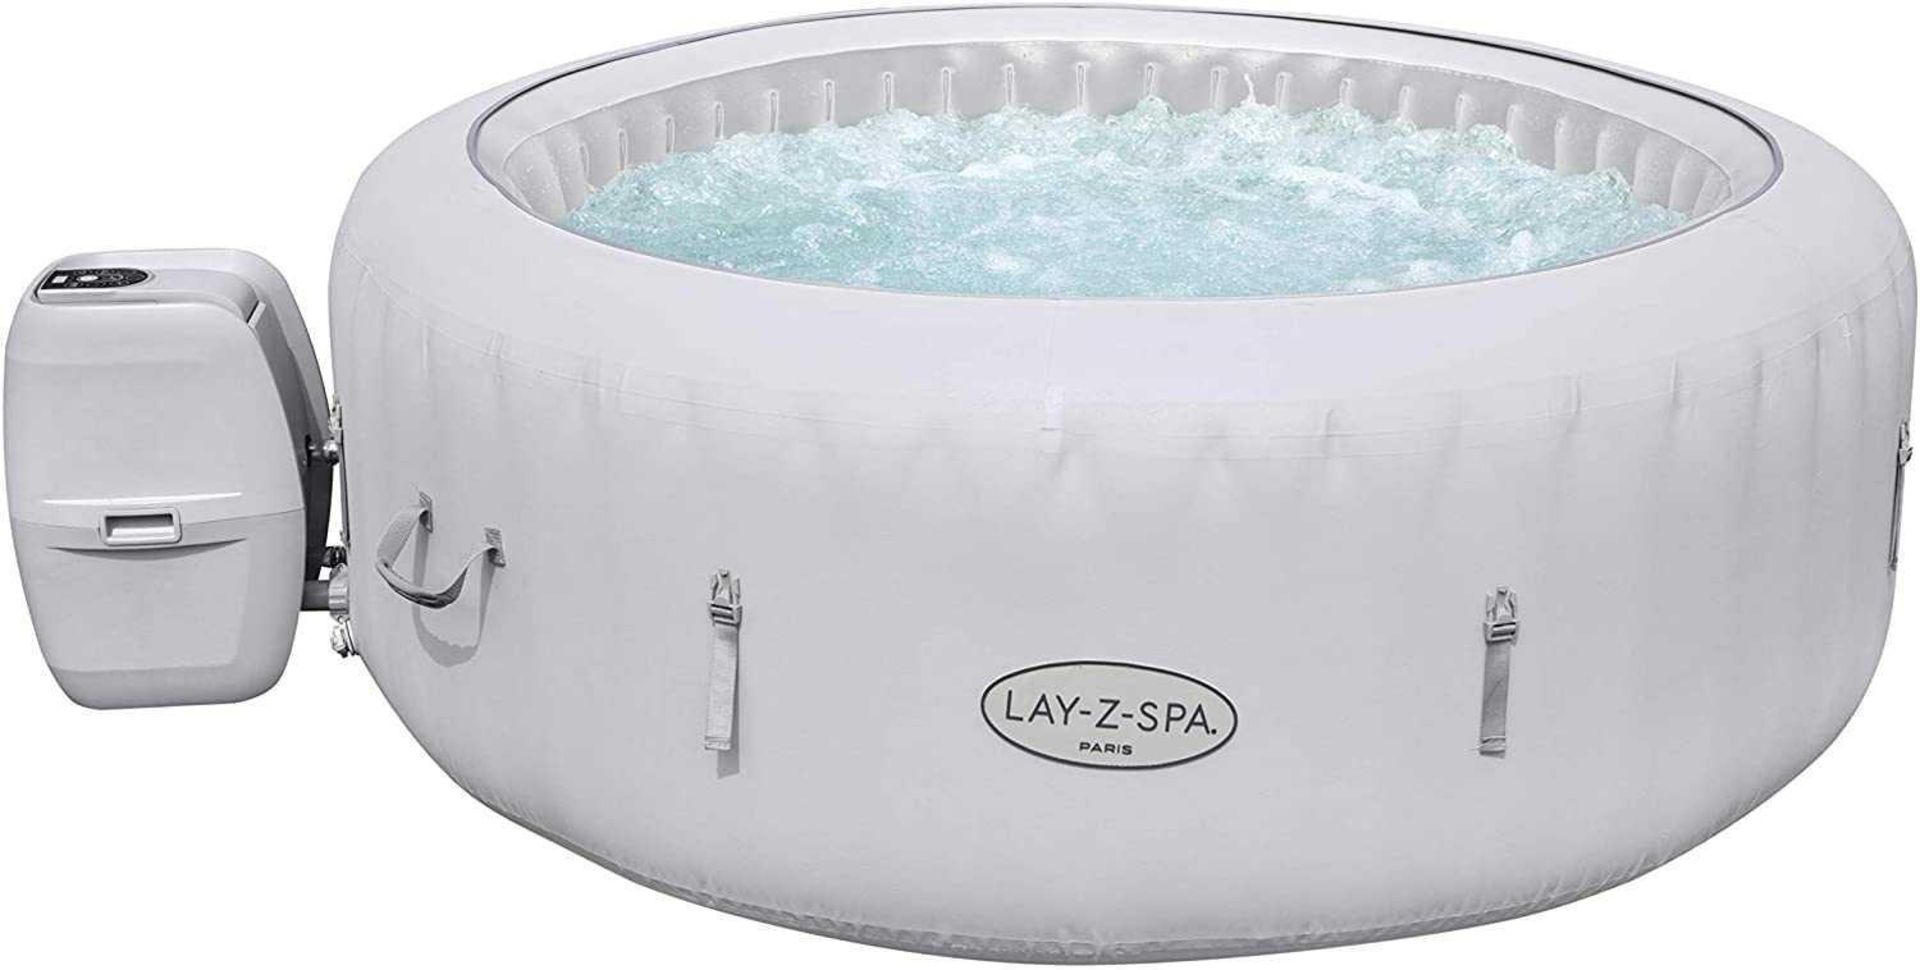 RRP £500 Boxed/Unboxed Lay-Z-Spa Paris Hot Tub With Built In Led Light System(Sp)